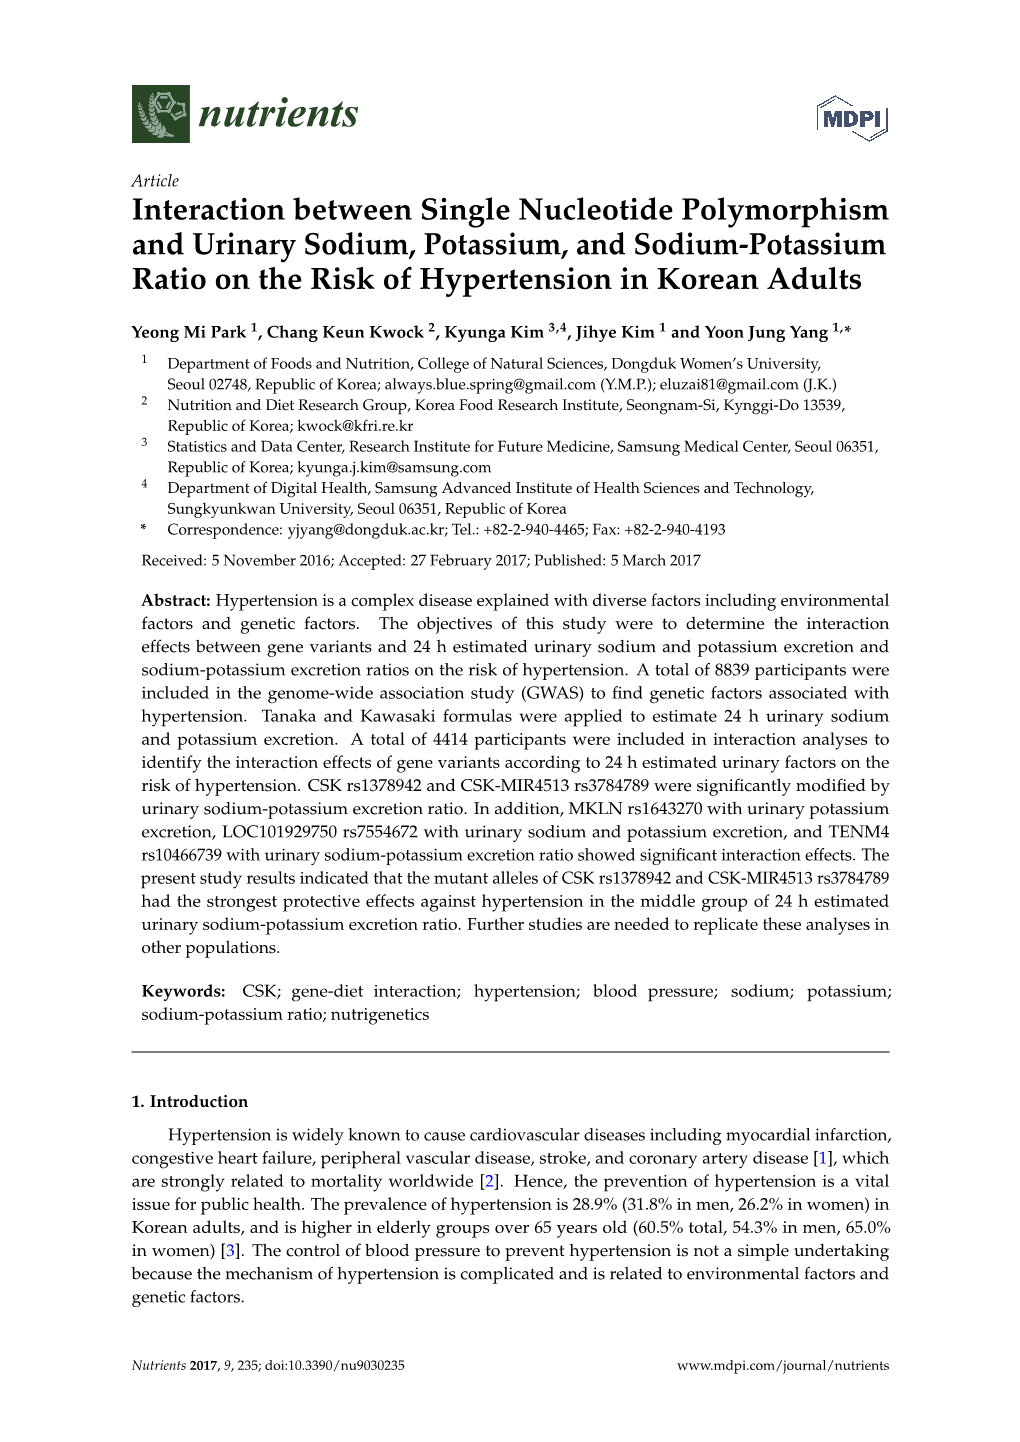 Interaction Between Single Nucleotide Polymorphism and Urinary Sodium, Potassium, and Sodium-Potassium Ratio on the Risk of Hypertension in Korean Adults